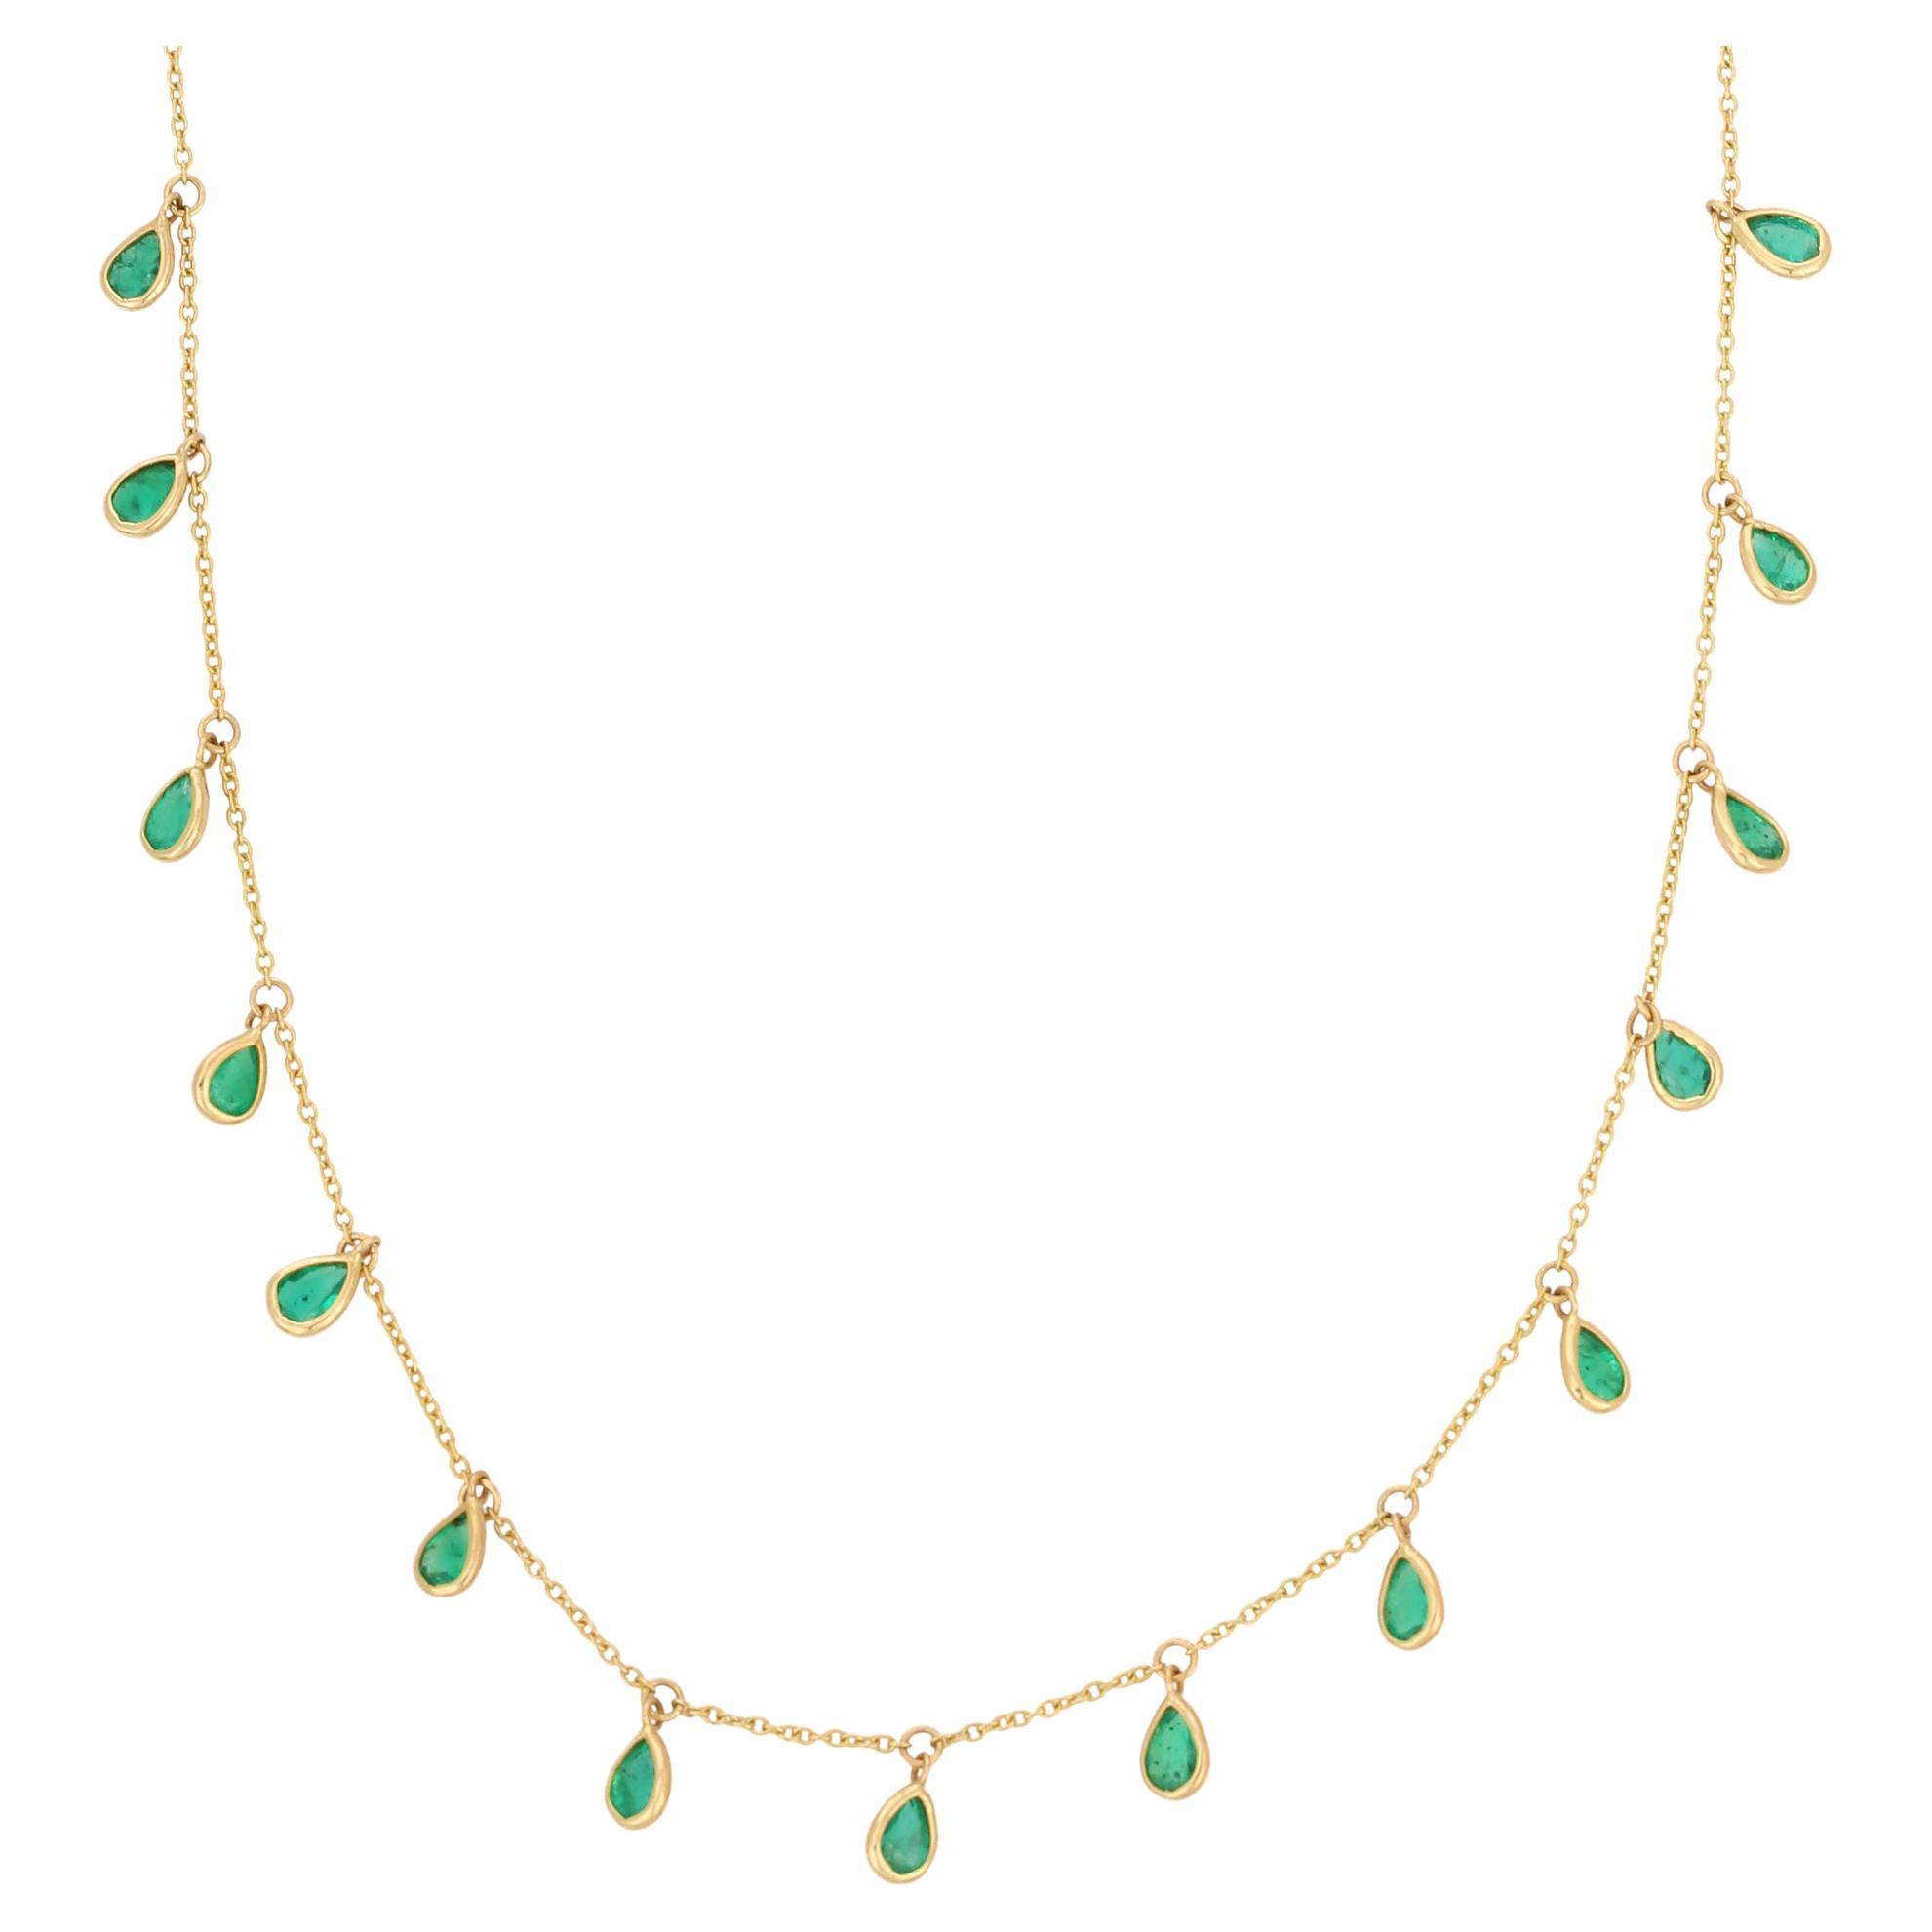 1.97 Carat Emerald Pear Shaped Drop Necklace in 18K Yellow Gold